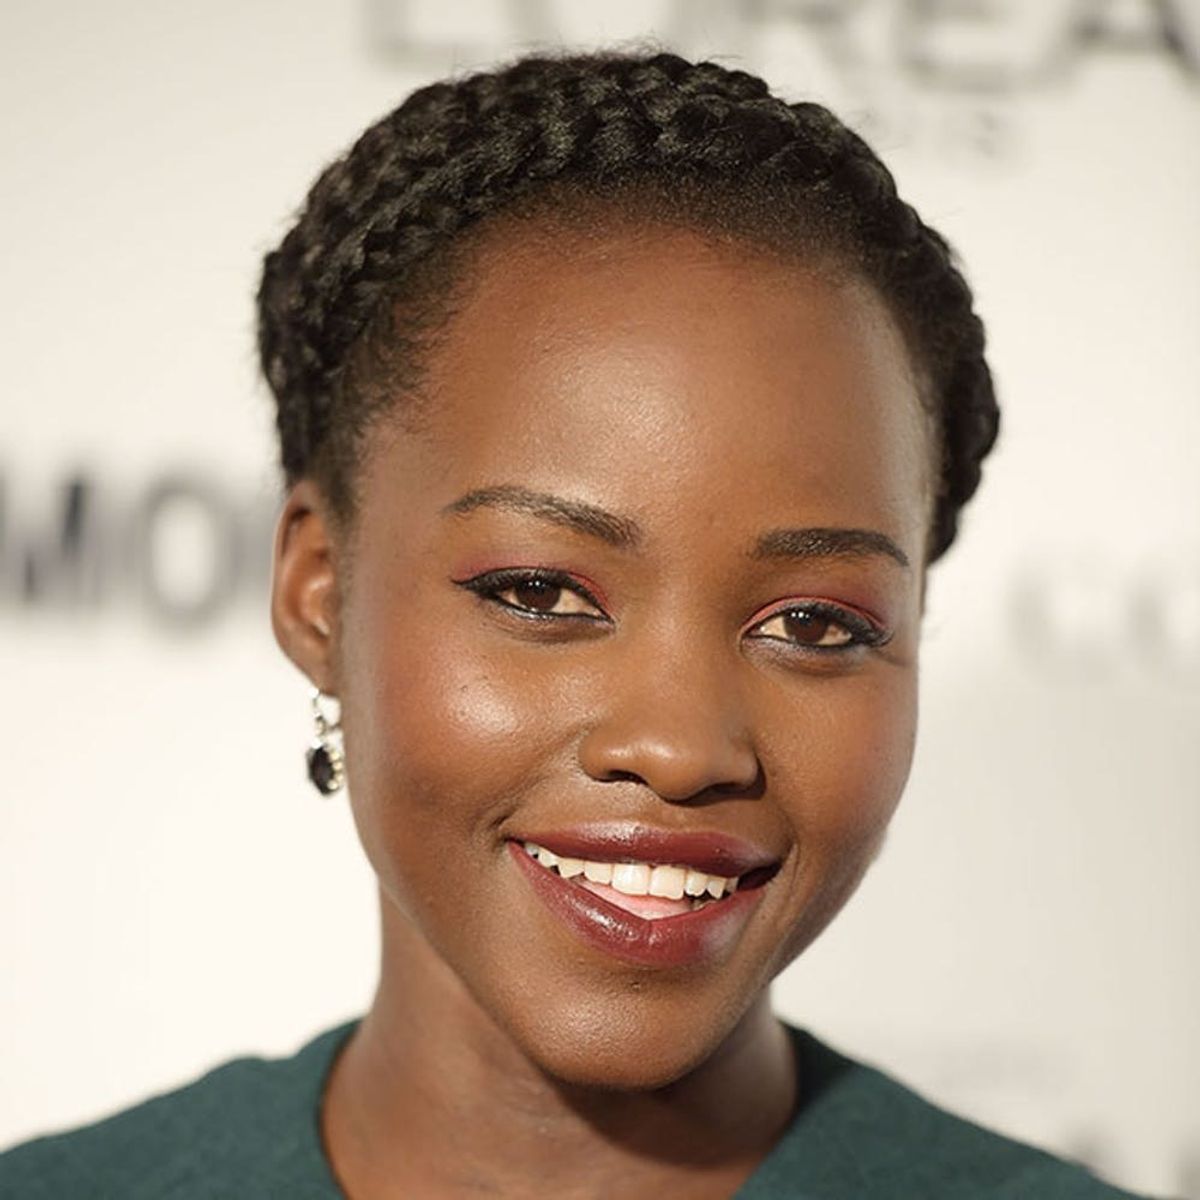 Lupita Nyong’o Wore the Perfect NYE Outfit + Makeup to the Star Wars Premiere